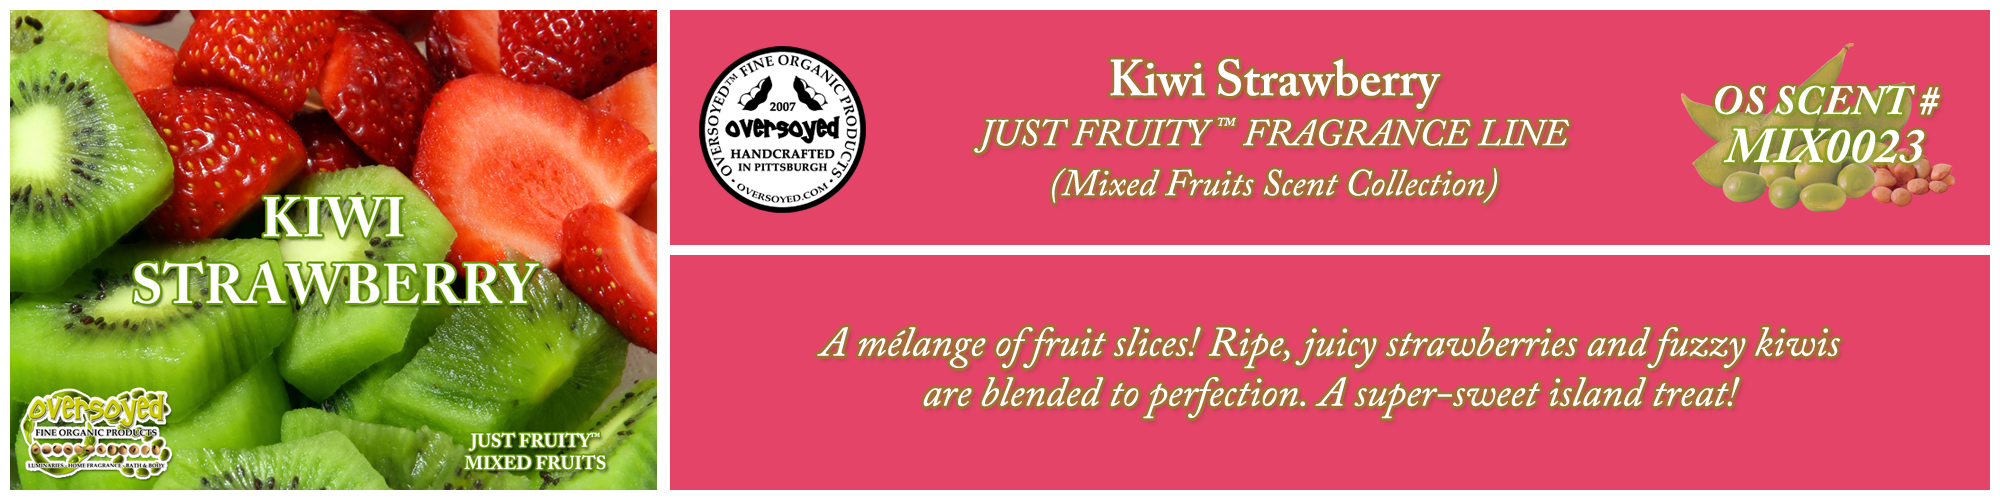 Kiwi Strawberry Handcrafted Products Collection